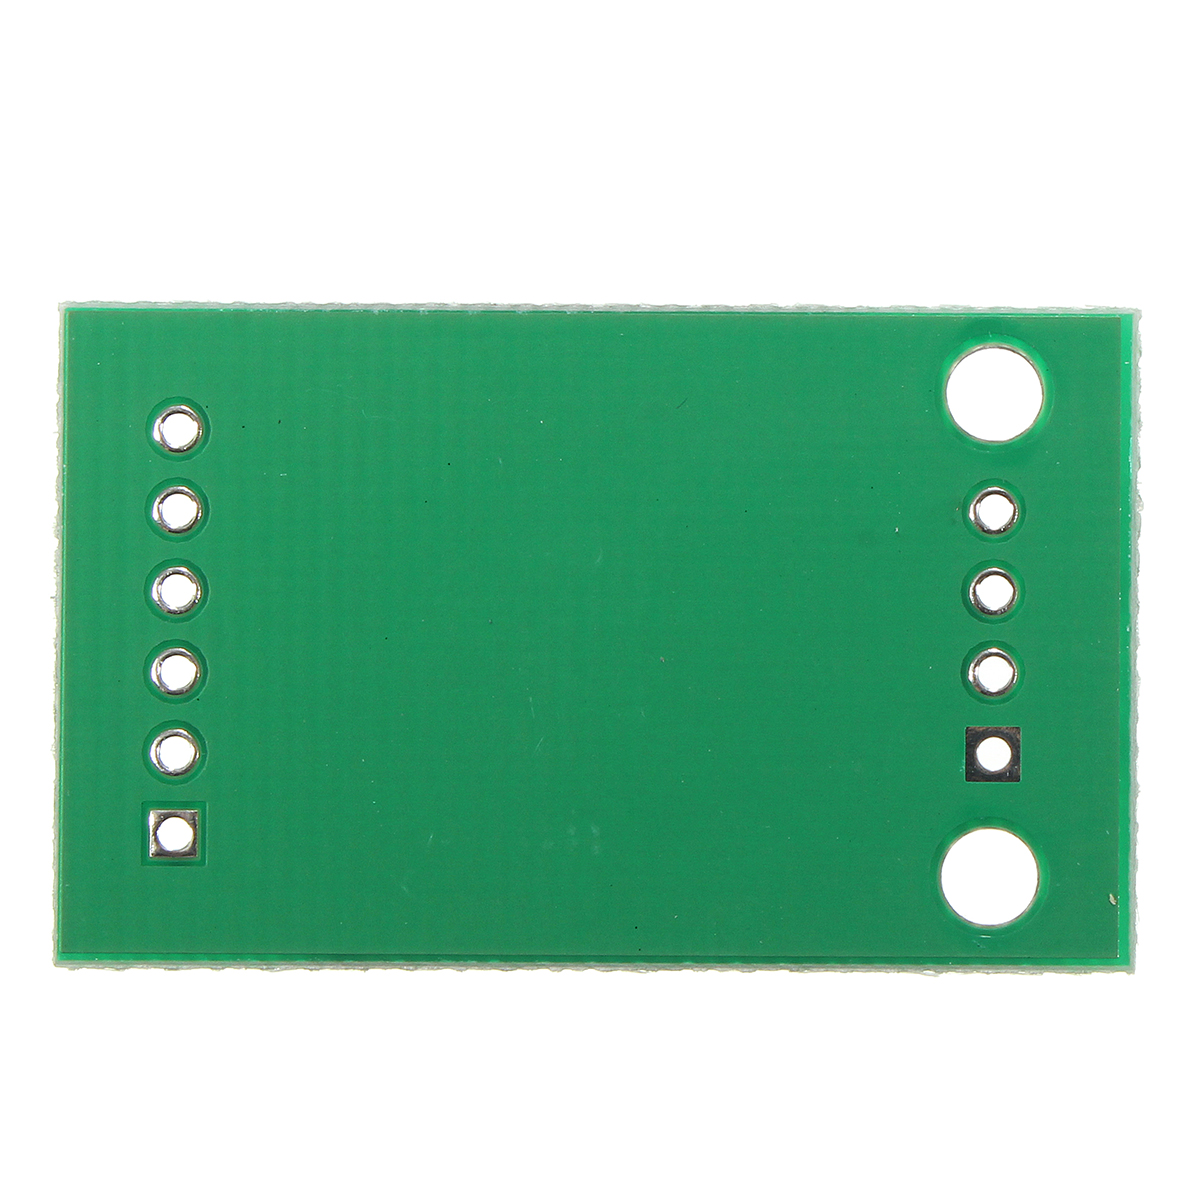 3Pcs-10kg-Aluminum-Alloy-Small-Scale-Weighing-Pressure-Sensor-With-HX711-AD-Module-1136333